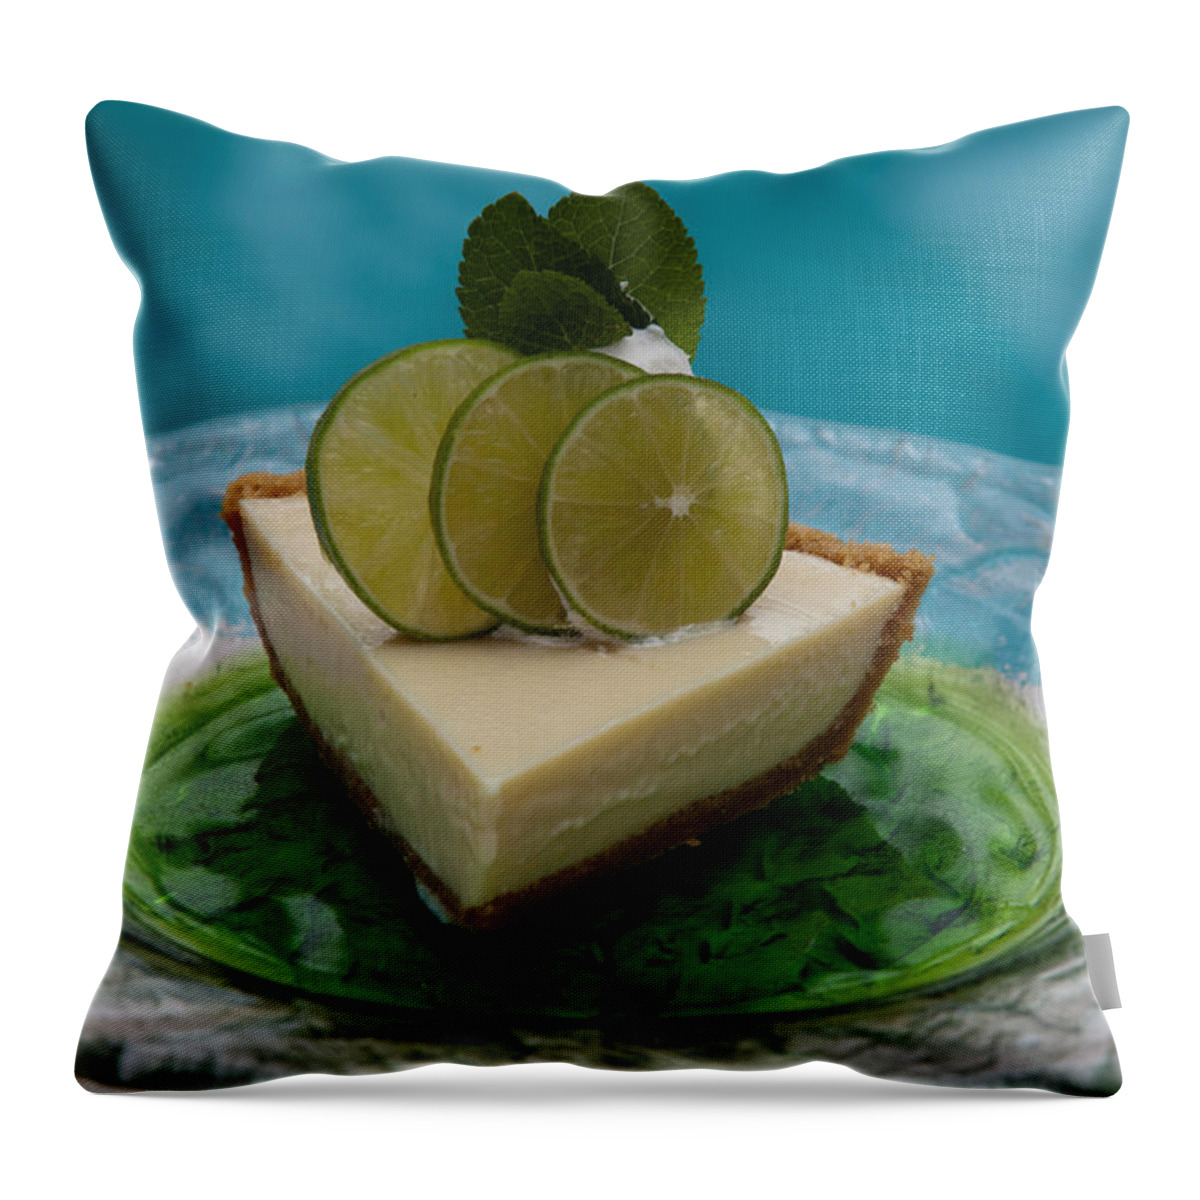 Food Throw Pillow featuring the photograph Key Lime Pie 25 by Michael Fryd